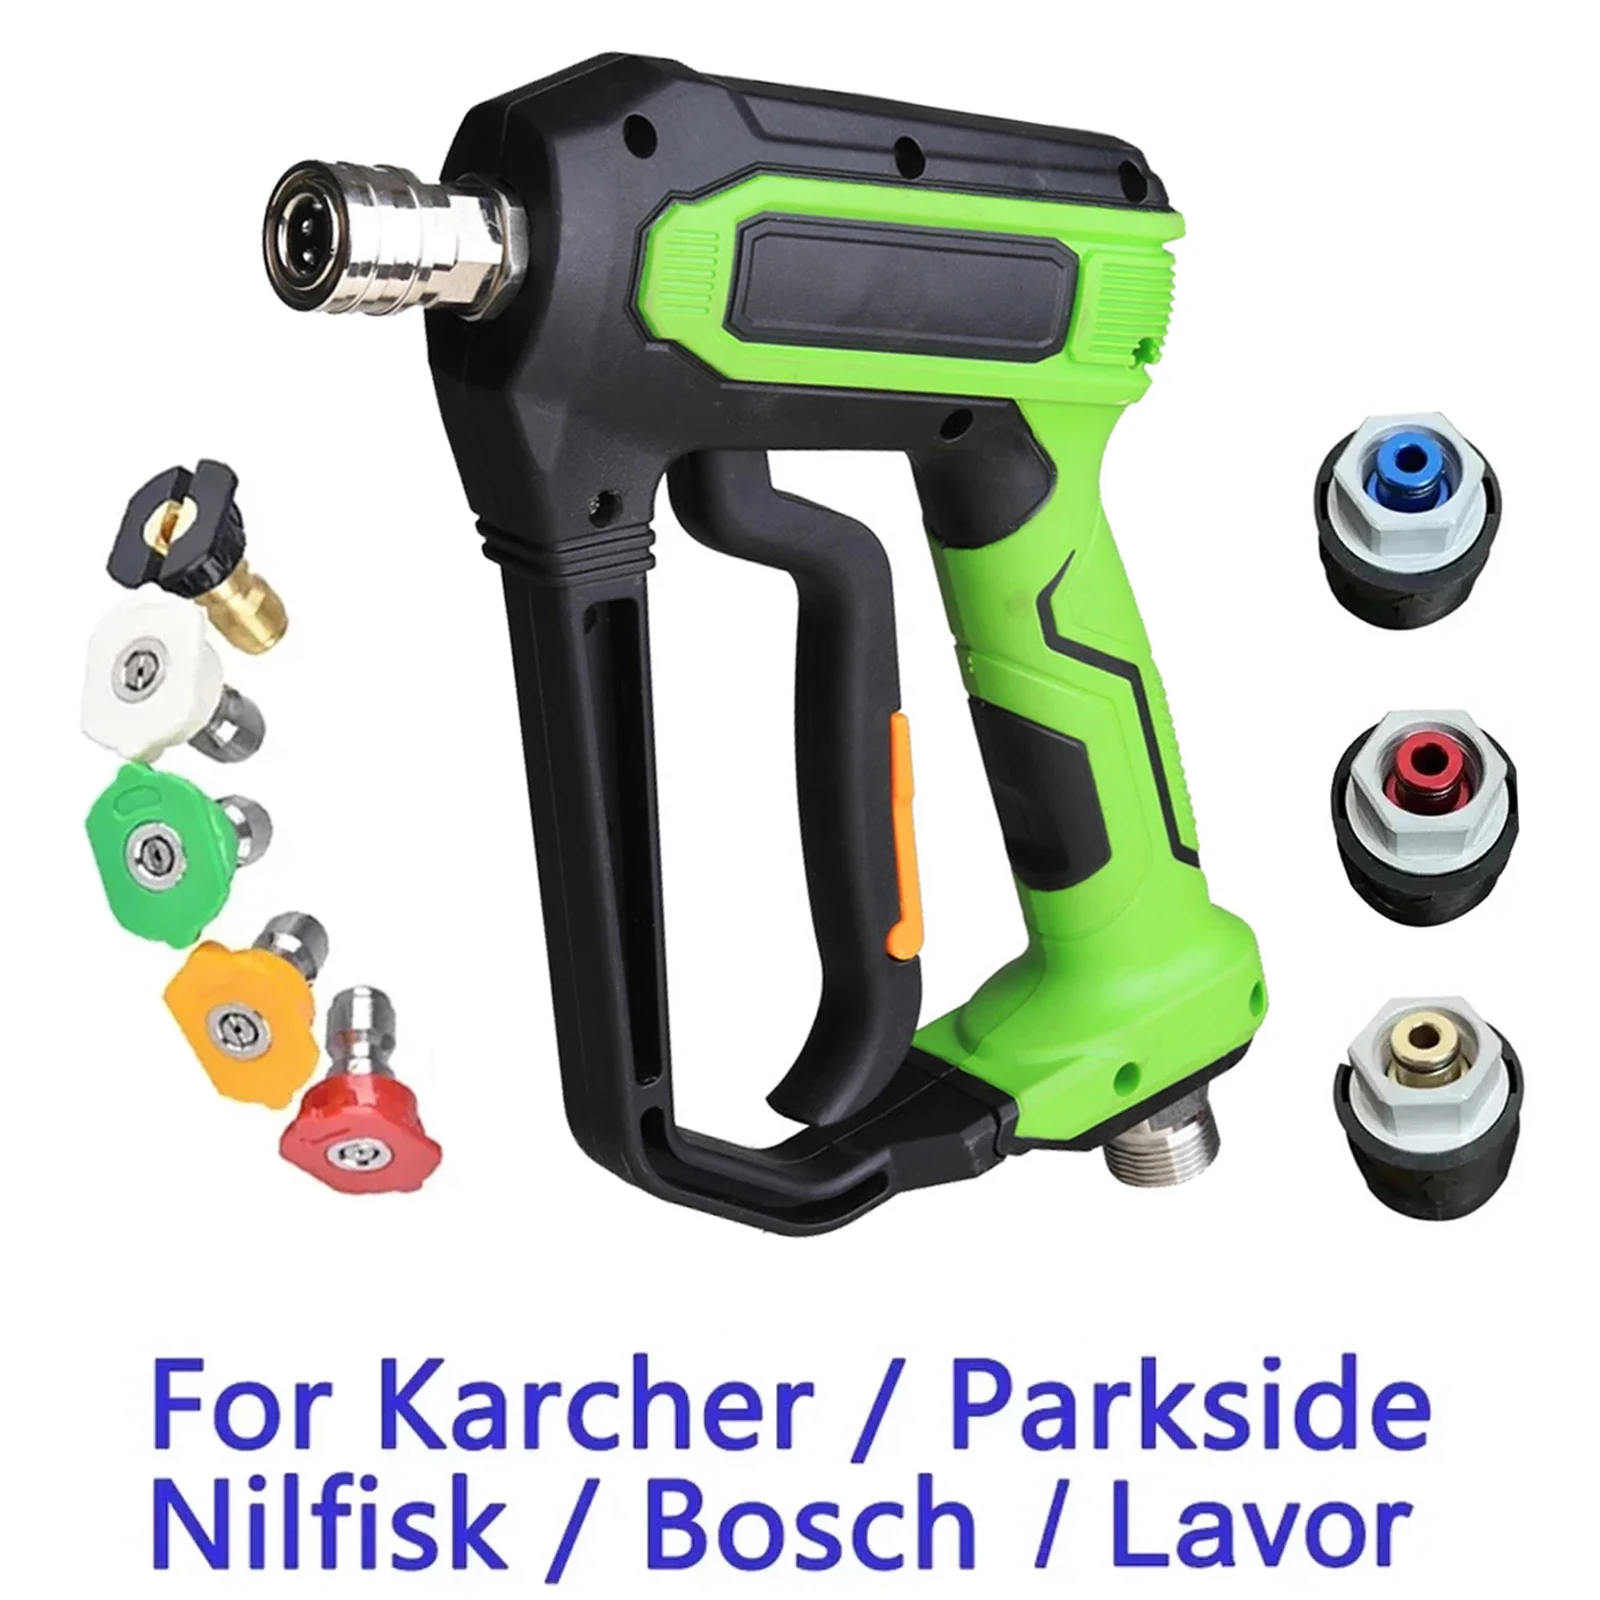 

High Pressure Cleaning Water Gun for Karcher Bosch Lavor 4000psi M22 G1/4 for Professional Electric High Pressure Washers